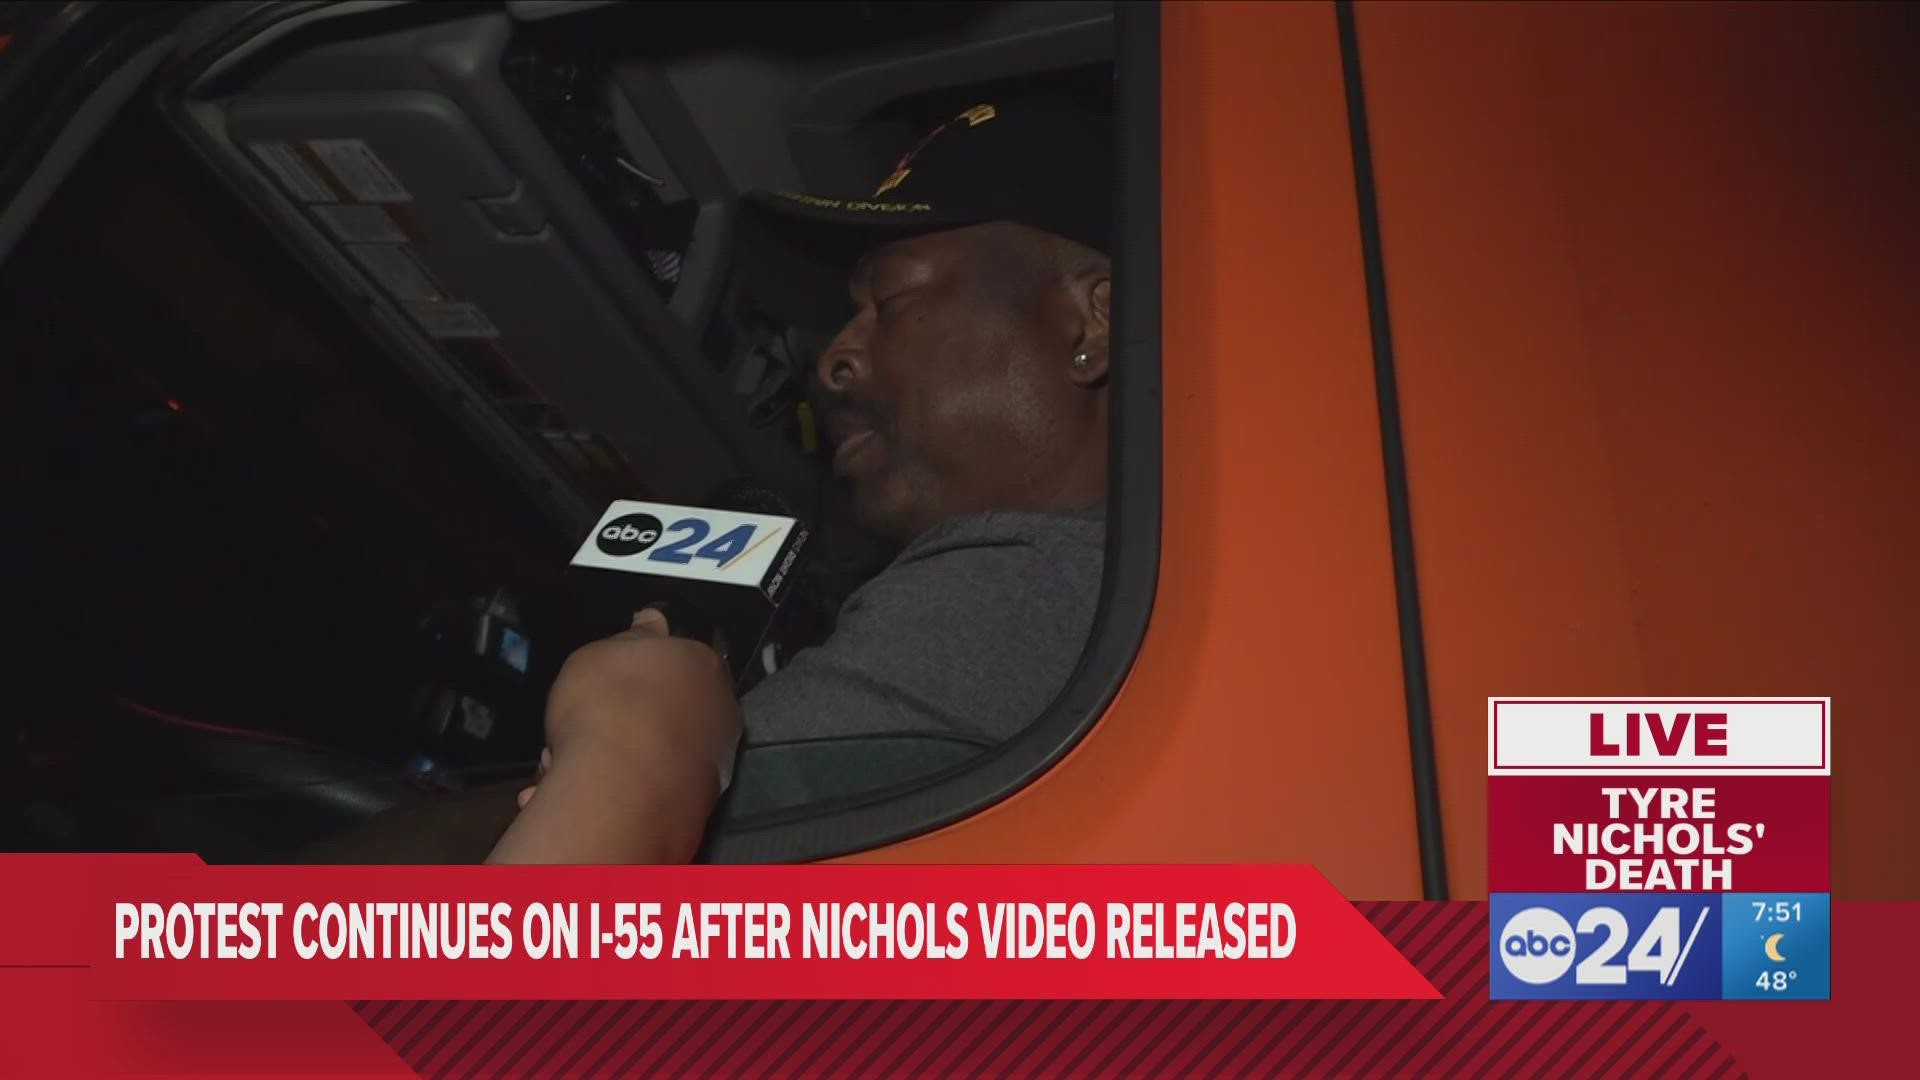 A trucker on the interstate talks about the protest following the release of the Tyre Nichols video.